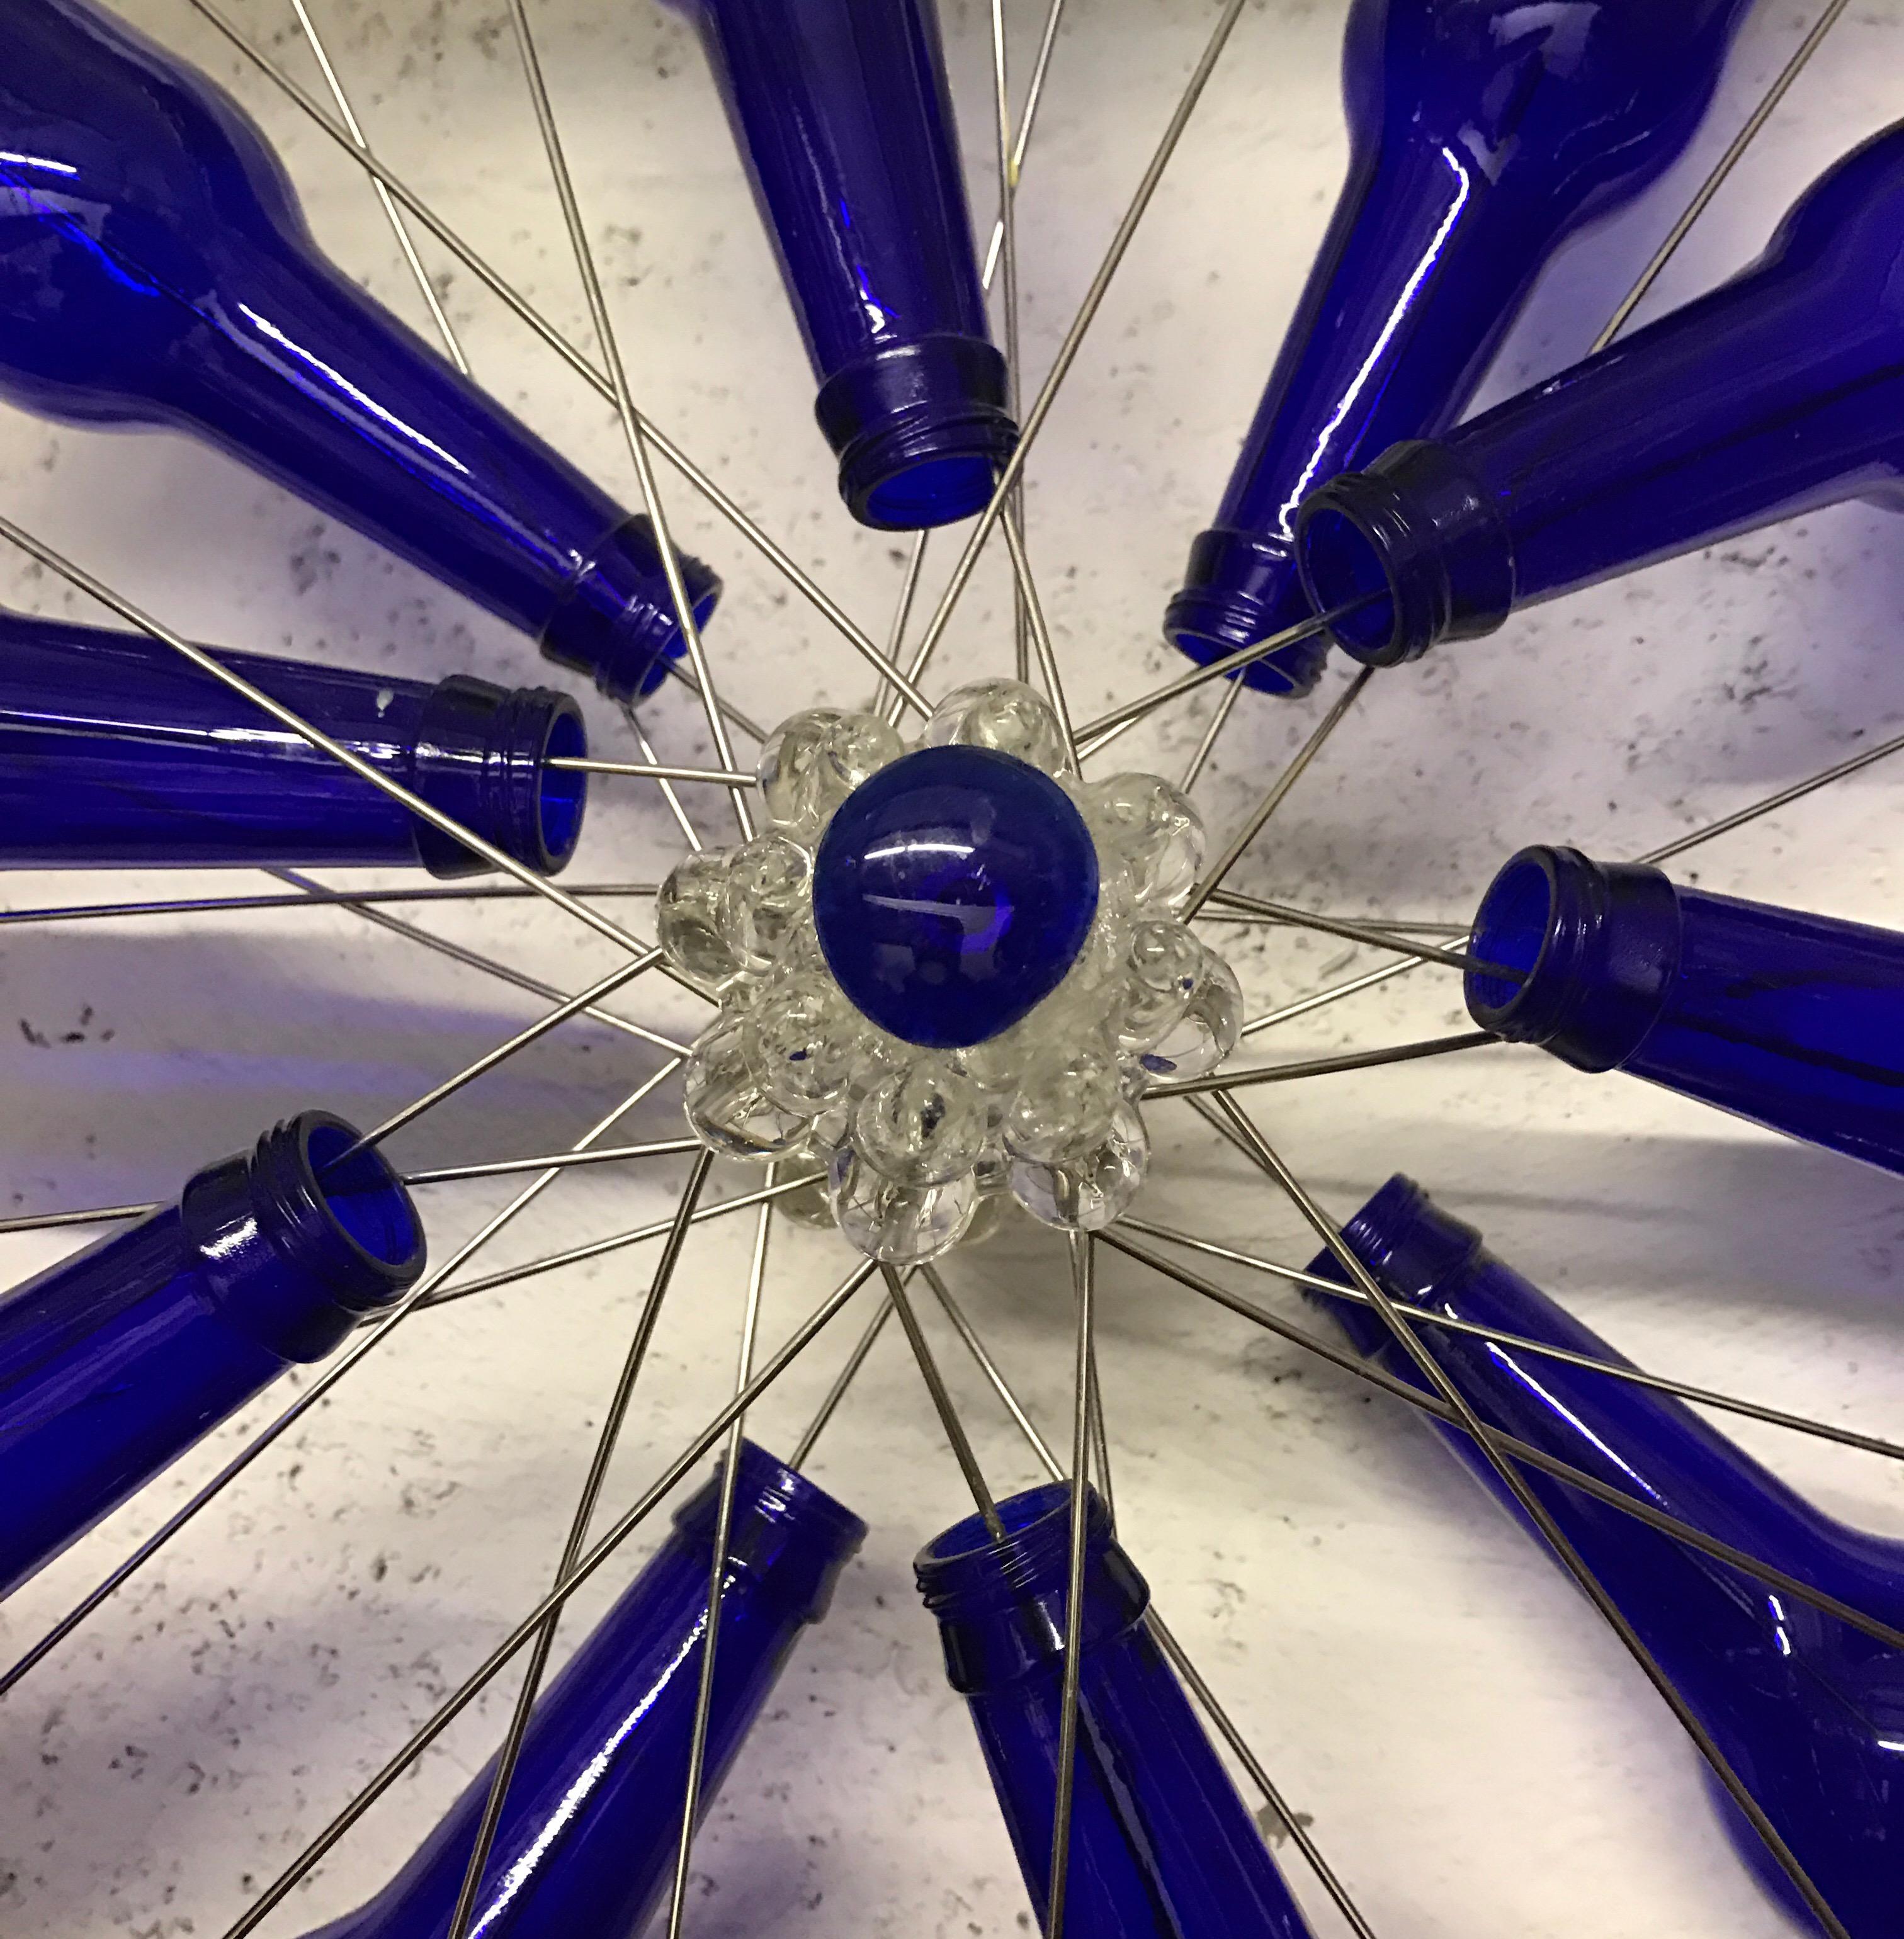 Modern blue bottles on a bike wheel sculpture
Blue bottles attached to the wheel of a bicycle and hand-wired further embellished with a blue ornament in the centre of the wheel.
Miami artist
Size: 25” diameter x 8” depth.